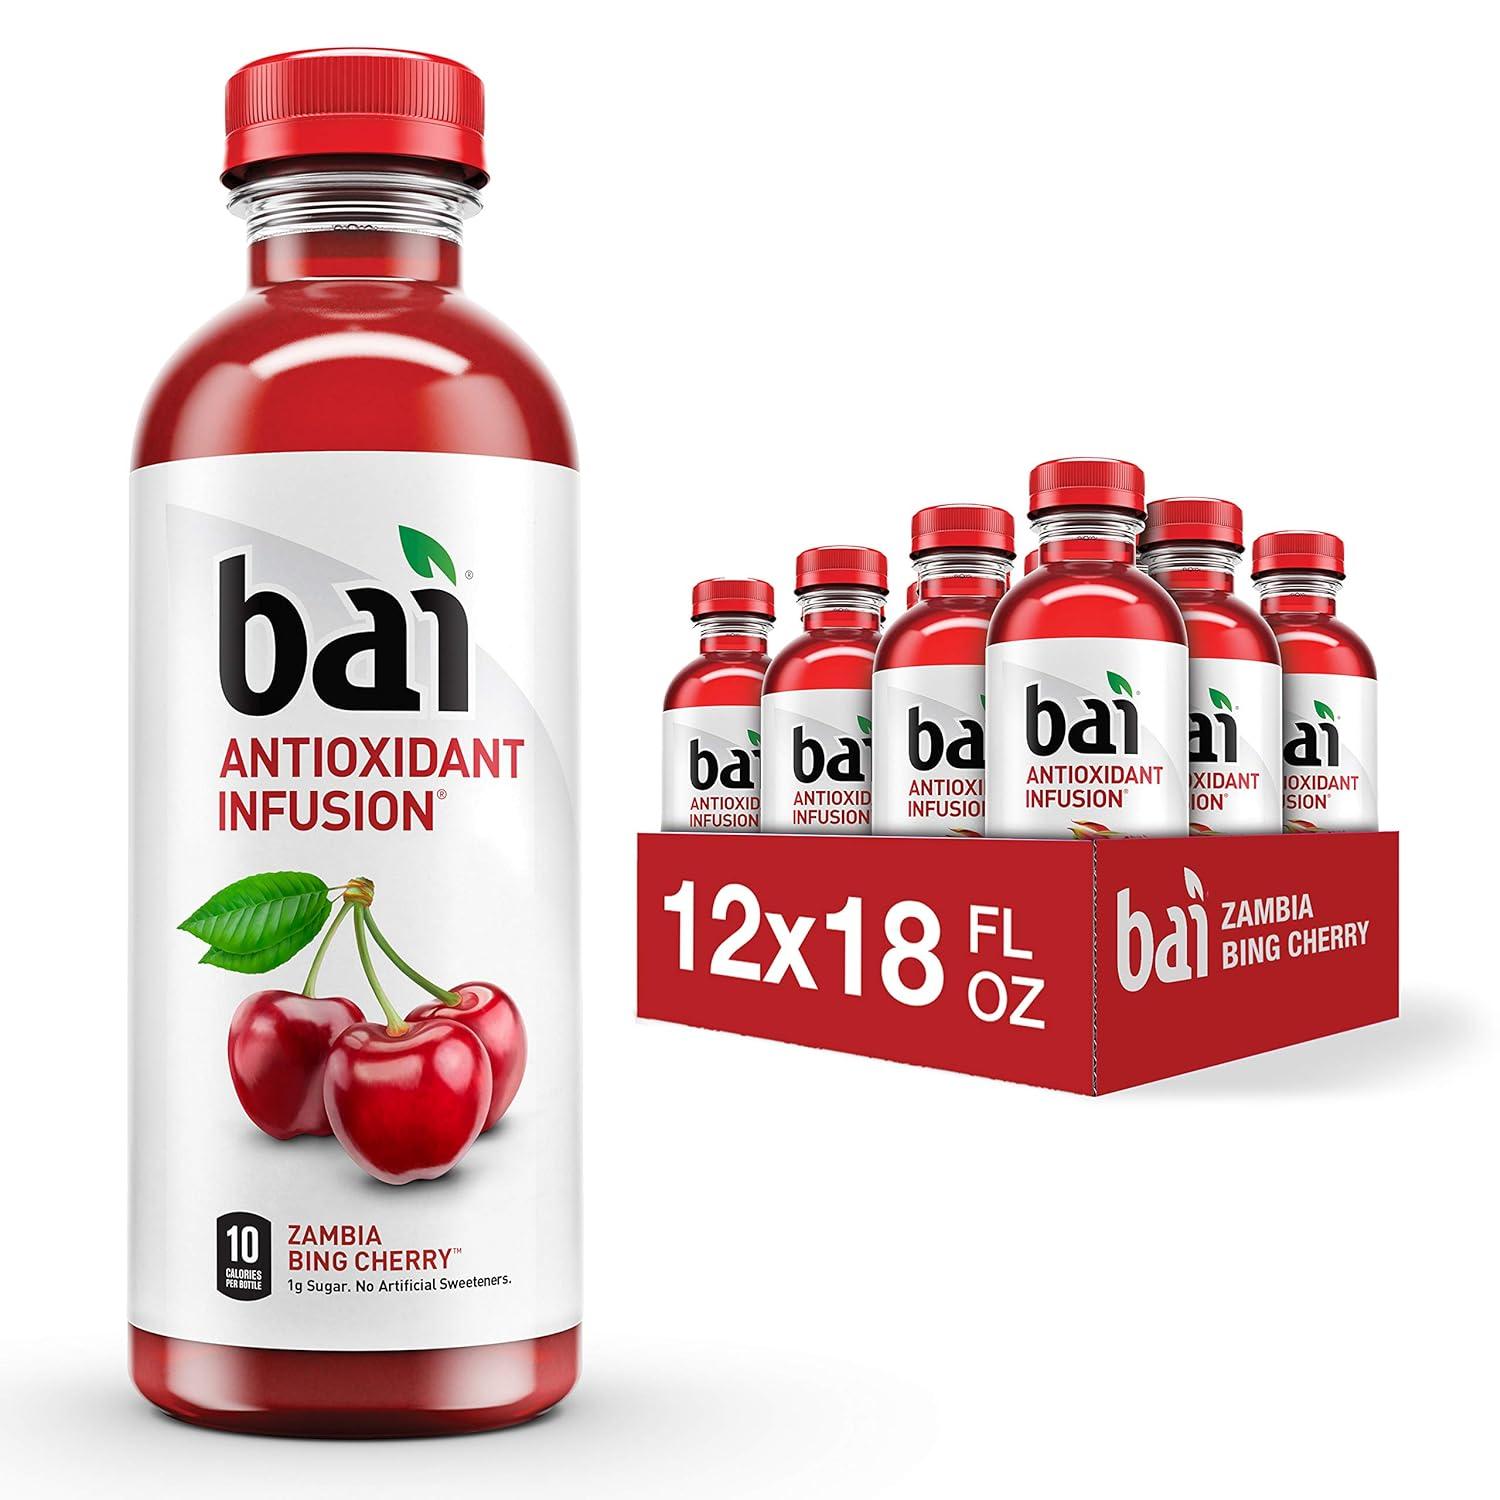 Bai Zambia Bing Cherry Flavored Water 12 Pack for $11.40